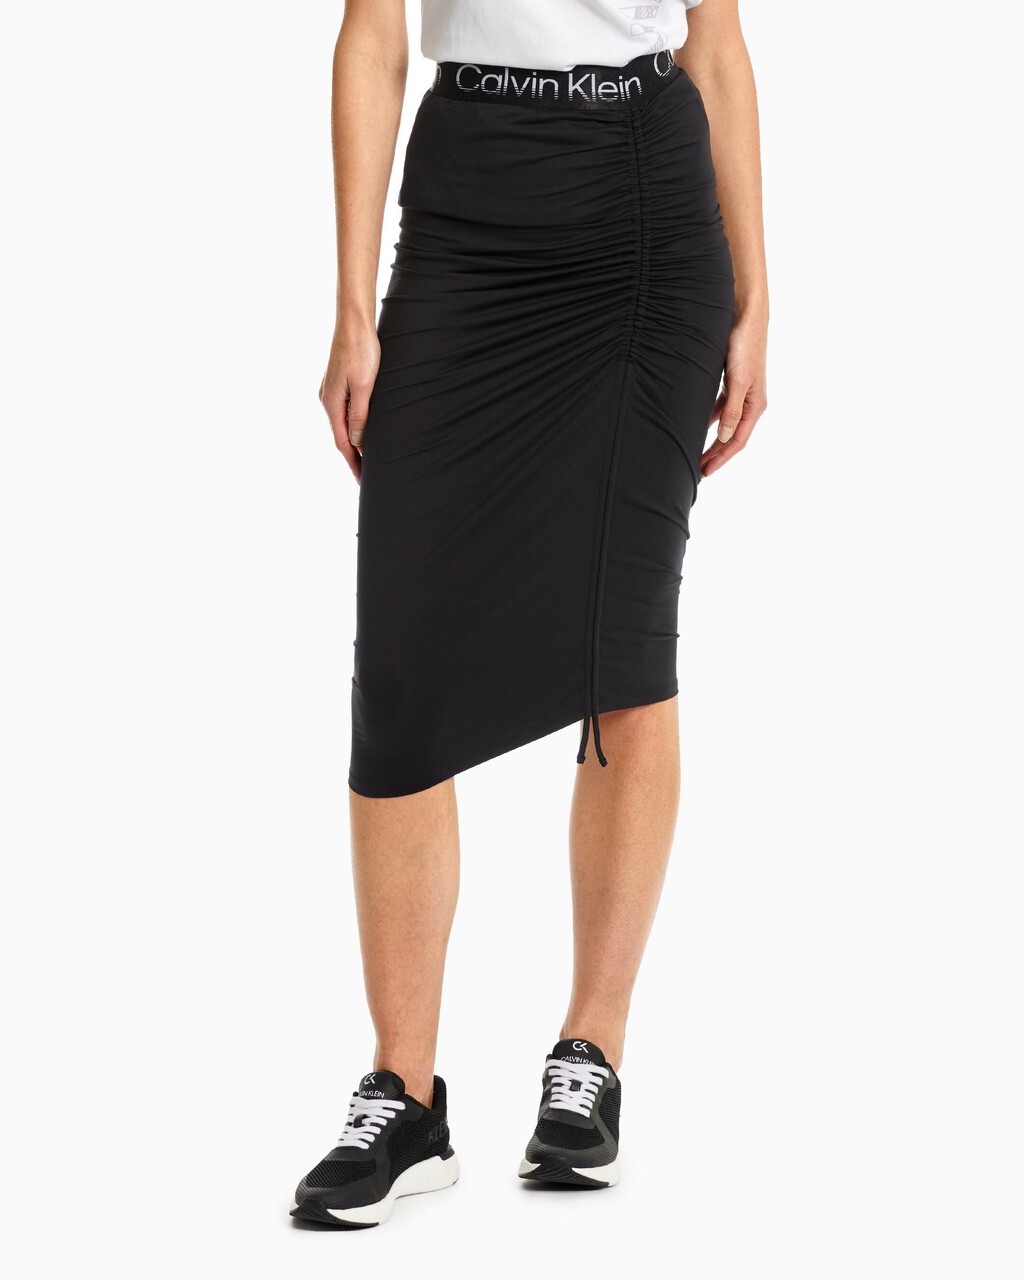 ACTIVE ICON RUCHED SKIRT, CK BLACK, hi-res